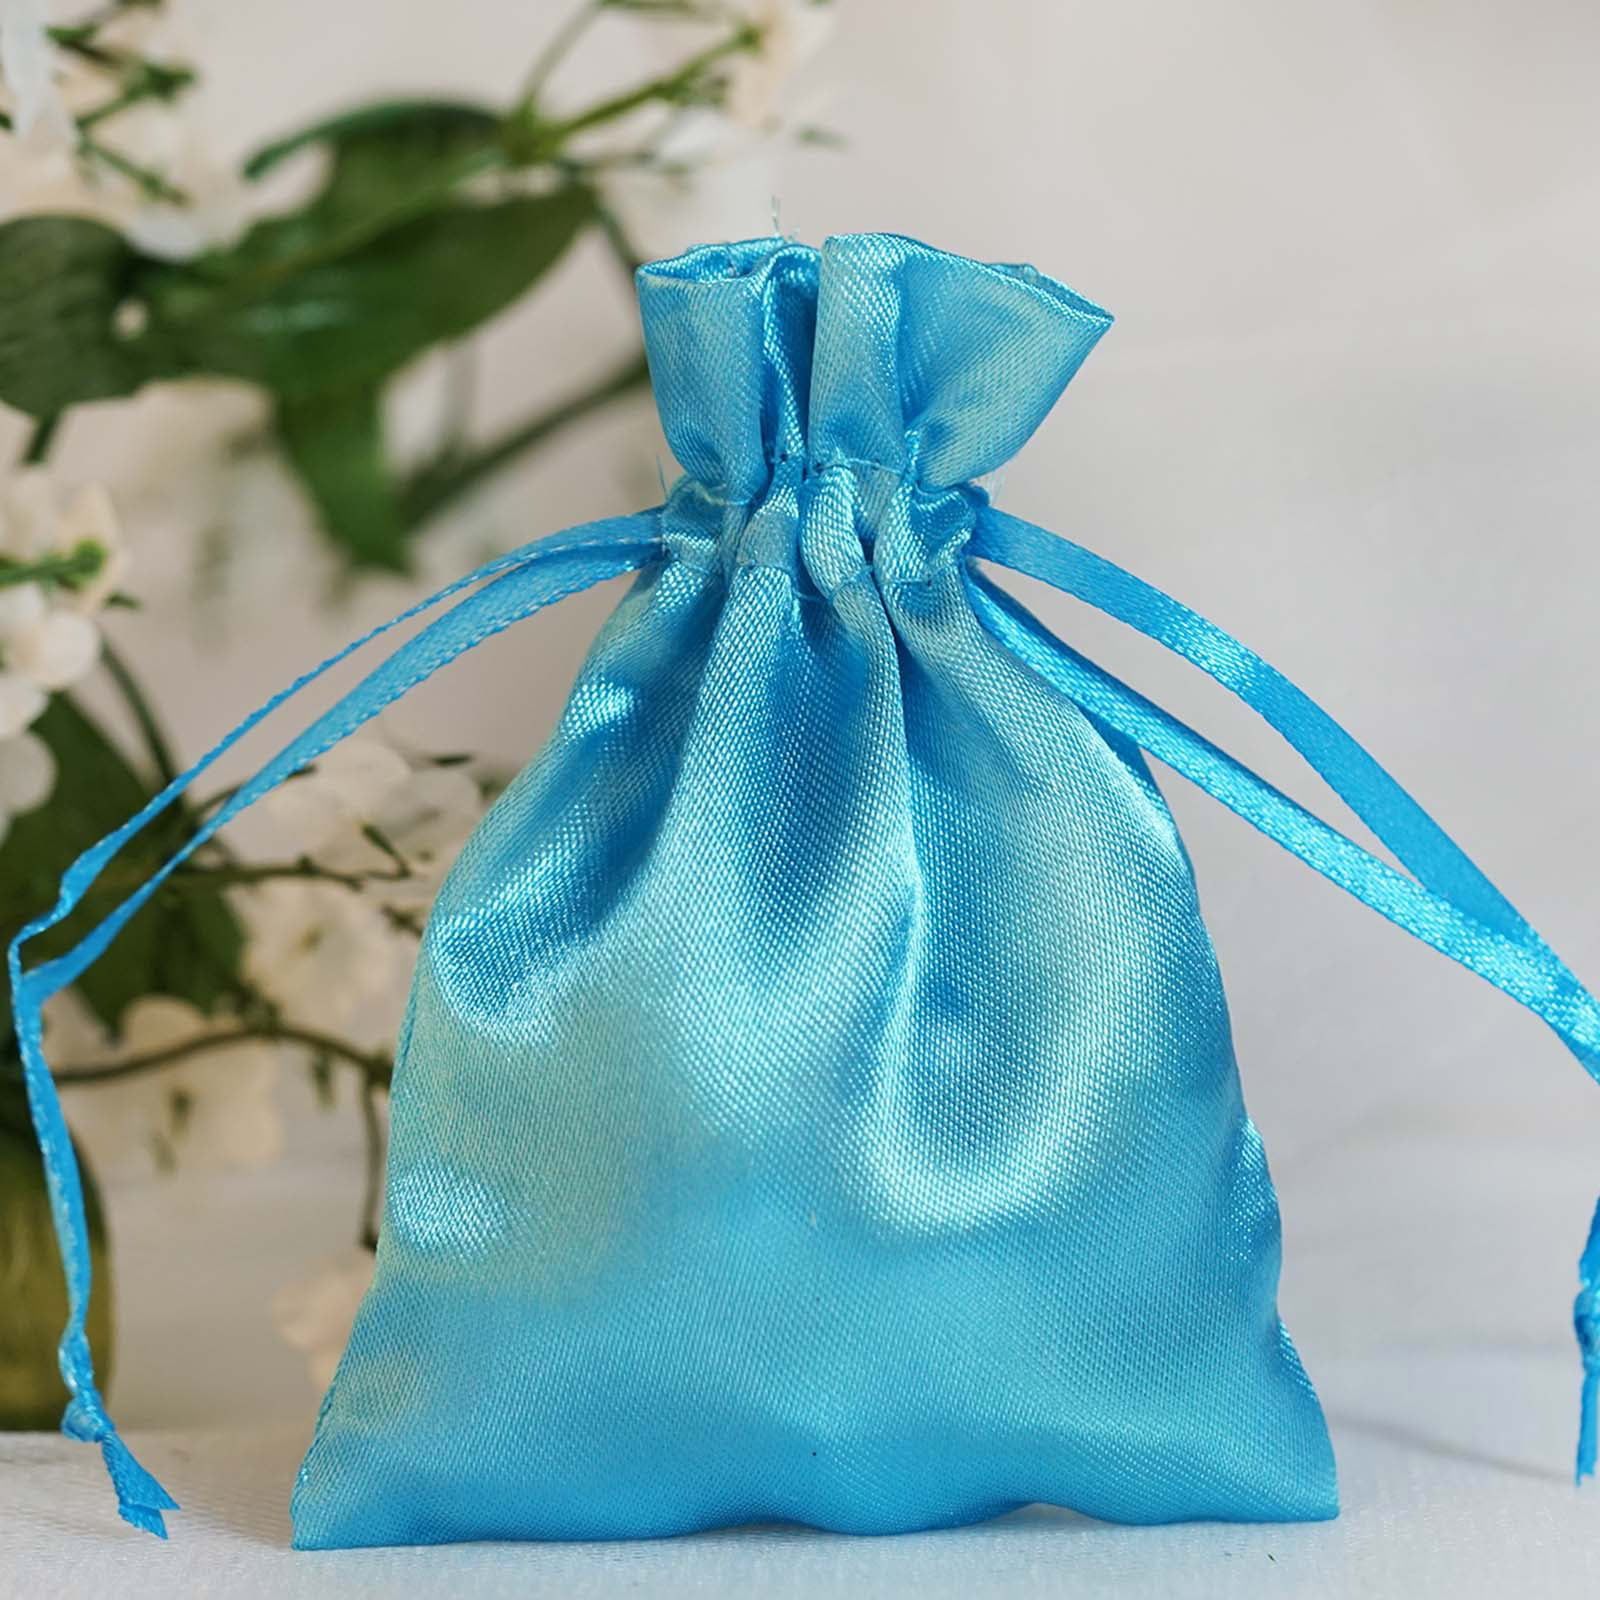 12 PCS HANDMADE DRAWSTRING JEWELRY GIFT POUCHES BAGS 4" x 6" #8022 